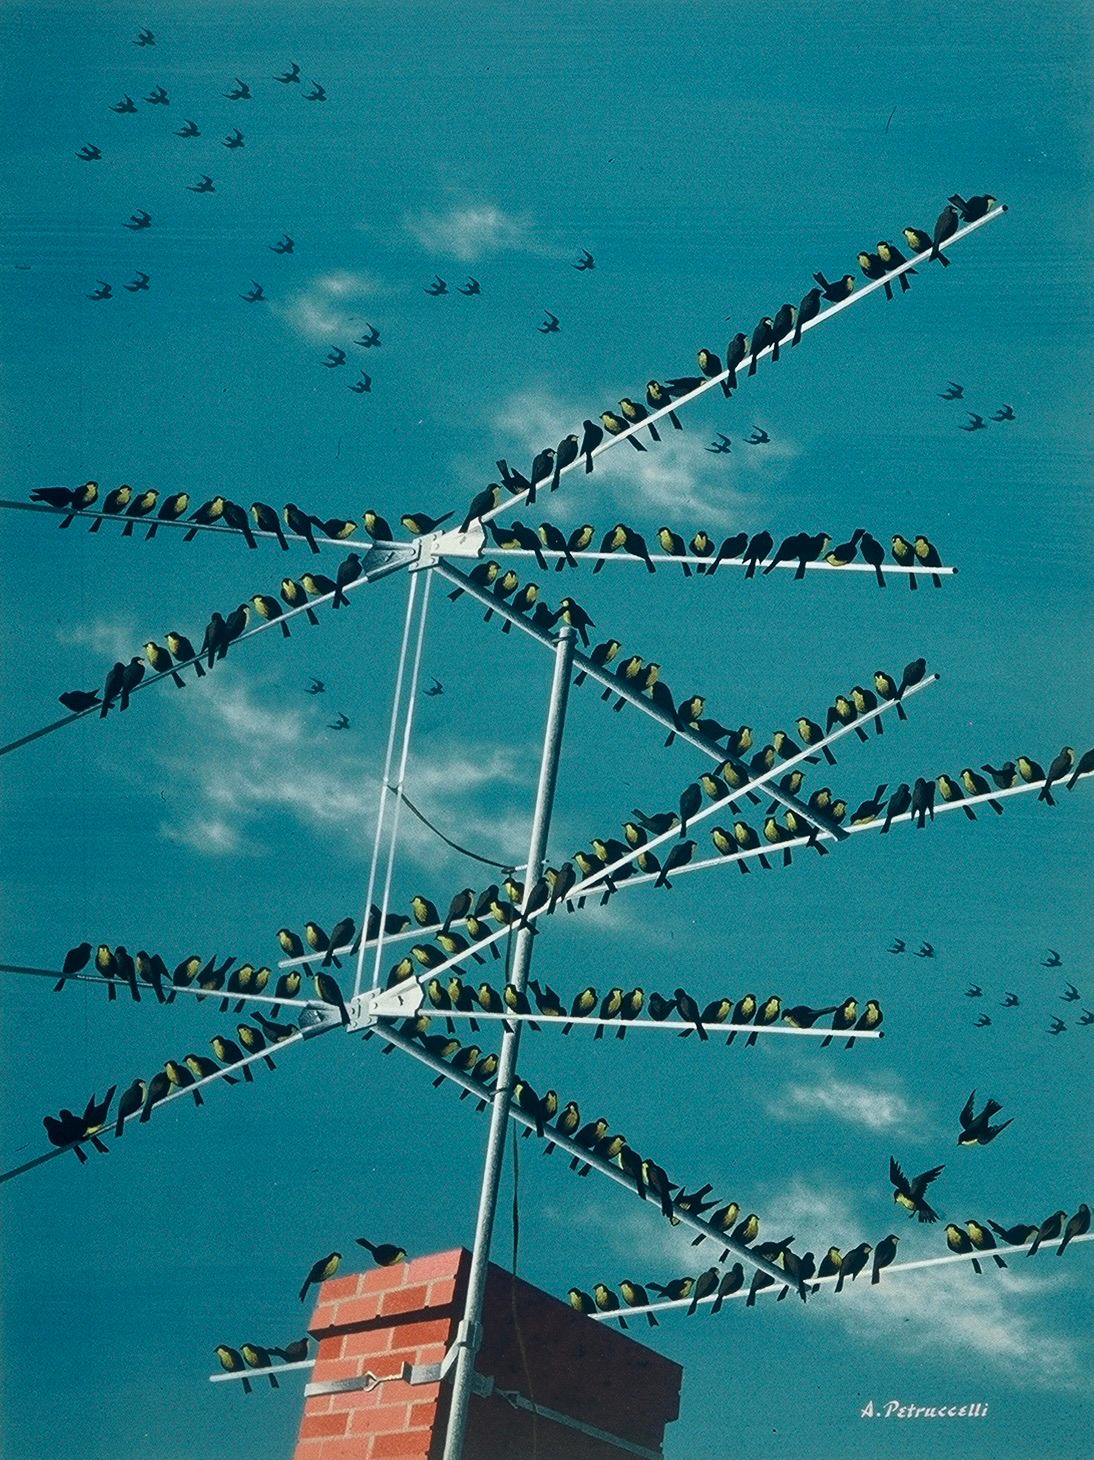 Antonio Petruccelli Landscape Painting - "Antenna Birds" New Yorker Mag Cover Proposal Mid-Century American Scene Modern